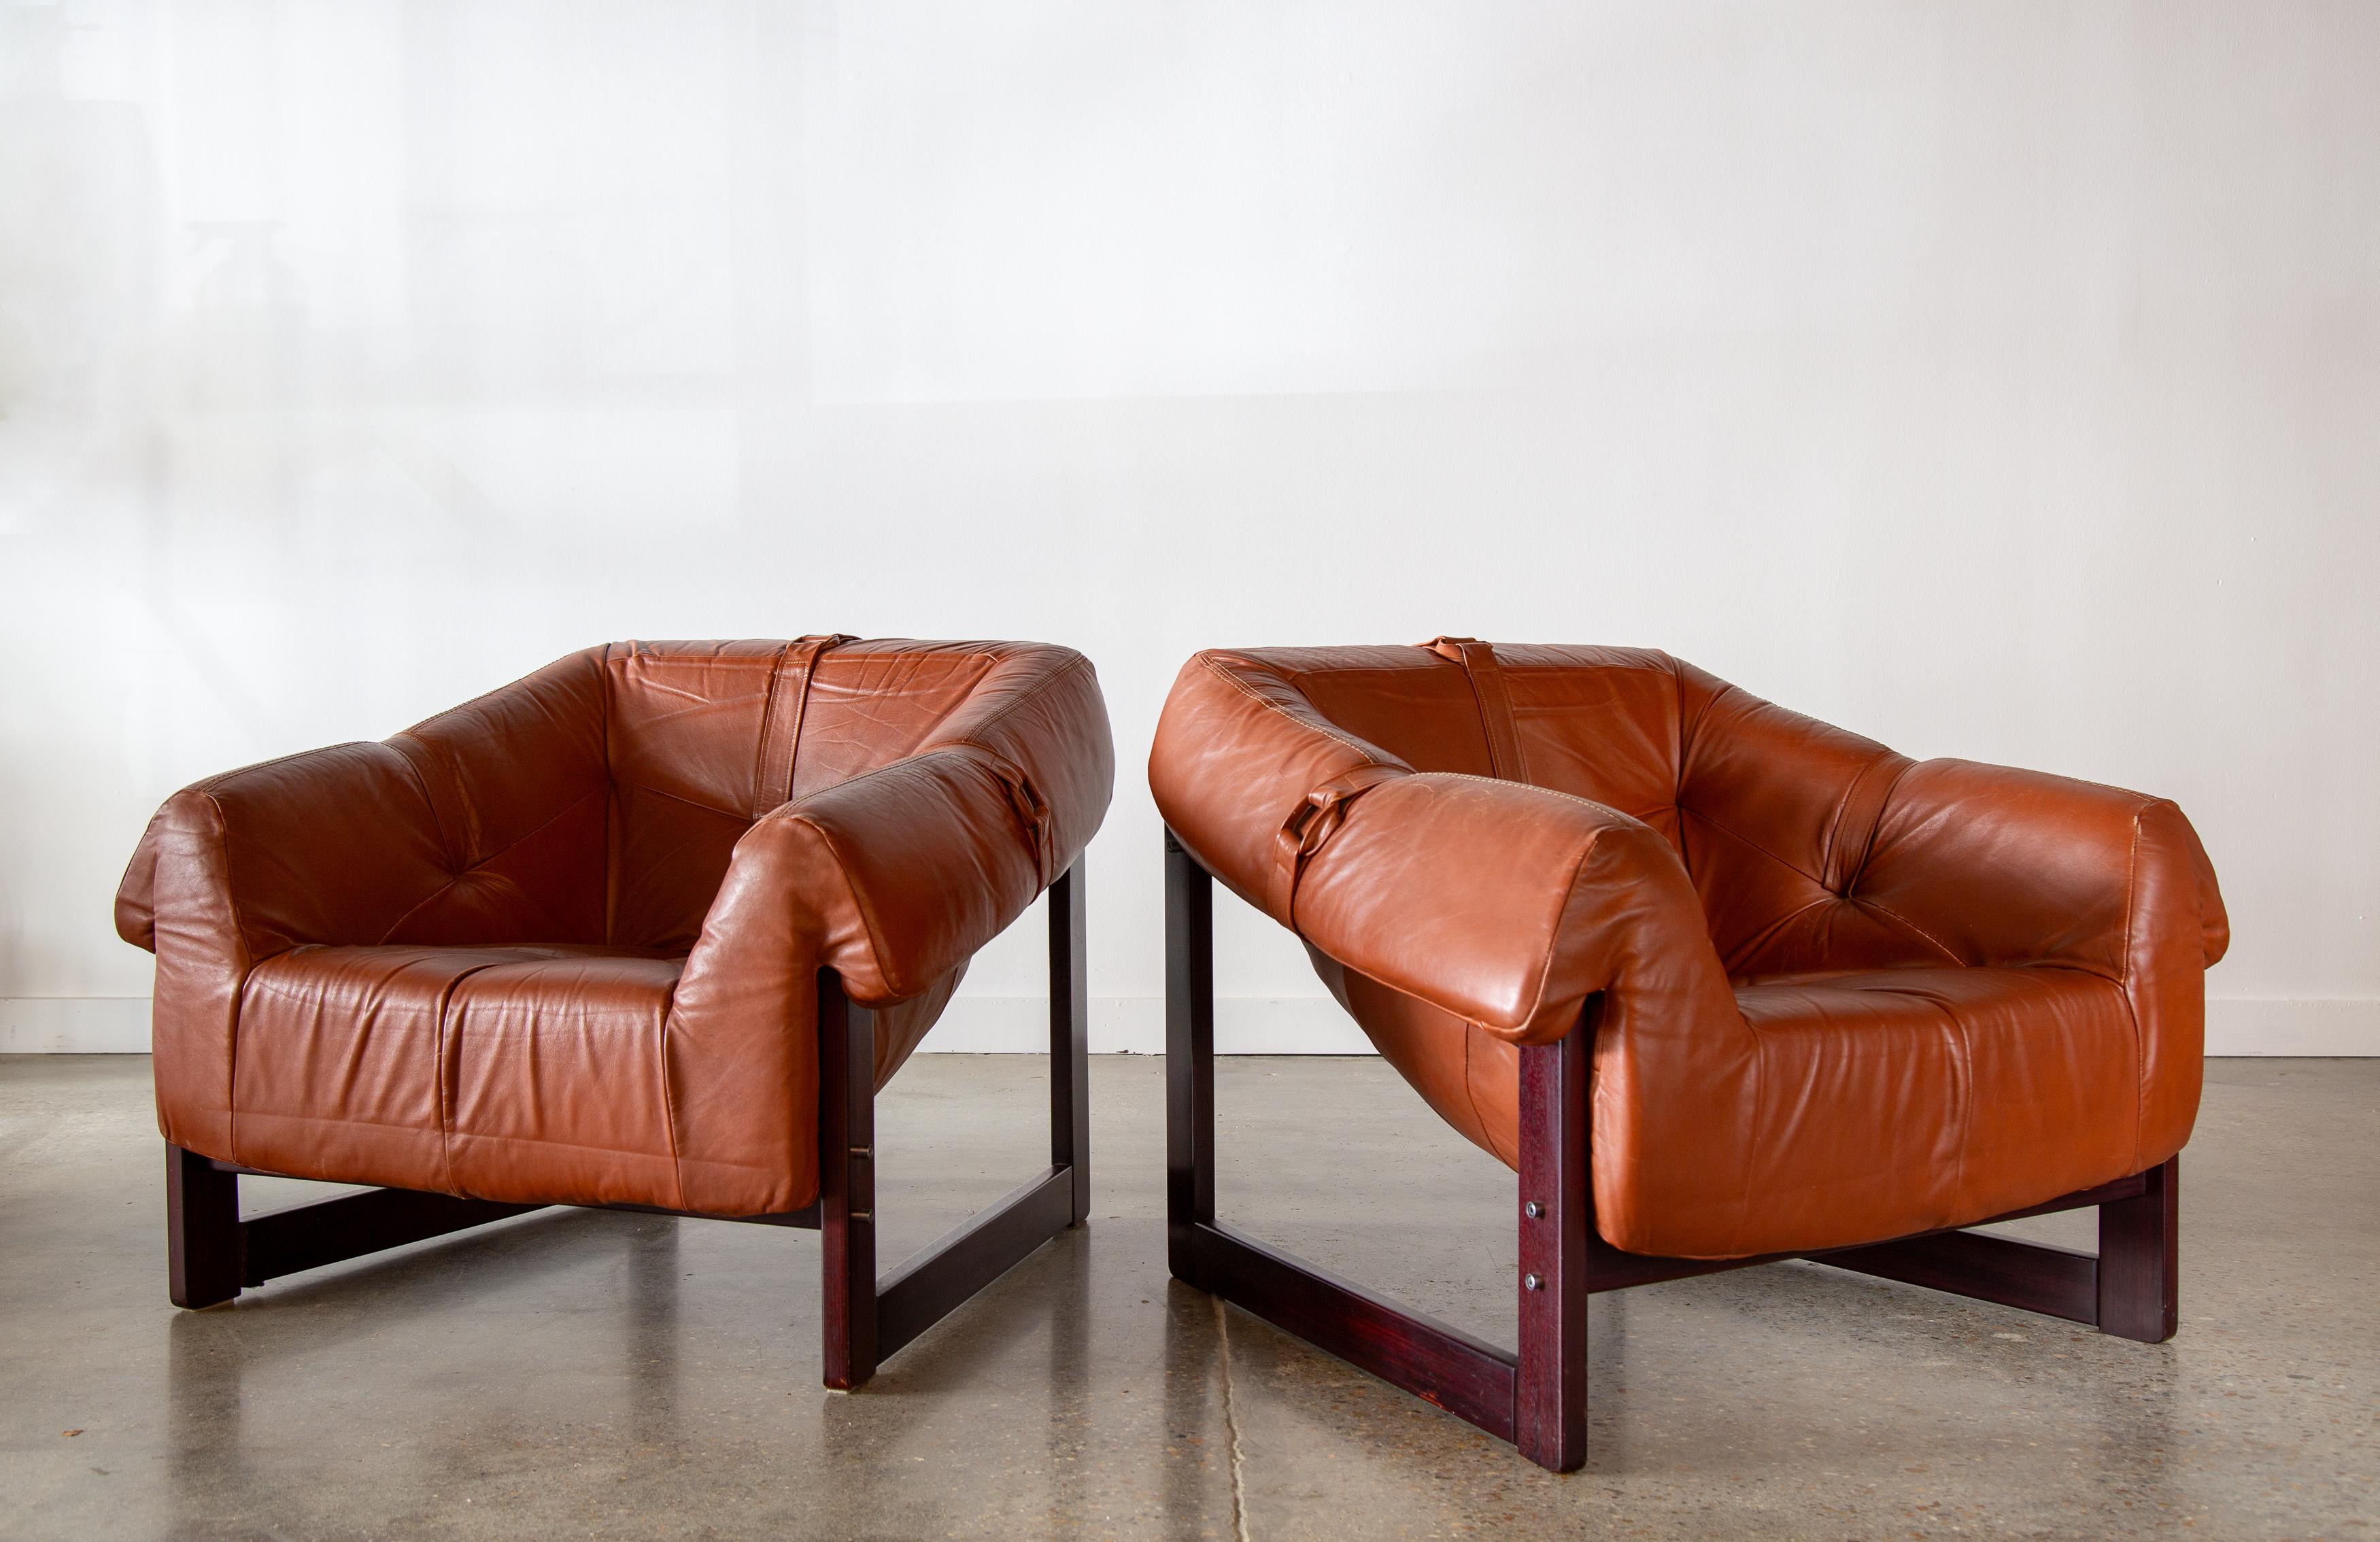 Extra comfortable pair of leather and rosewood lounge chairs designed by Percival Lafer for Brazil Industries Corp. Model MP93 chairs with Brazilian rosewood frames and rubber straps which support a foam filled leather cushion that wraps the frame.